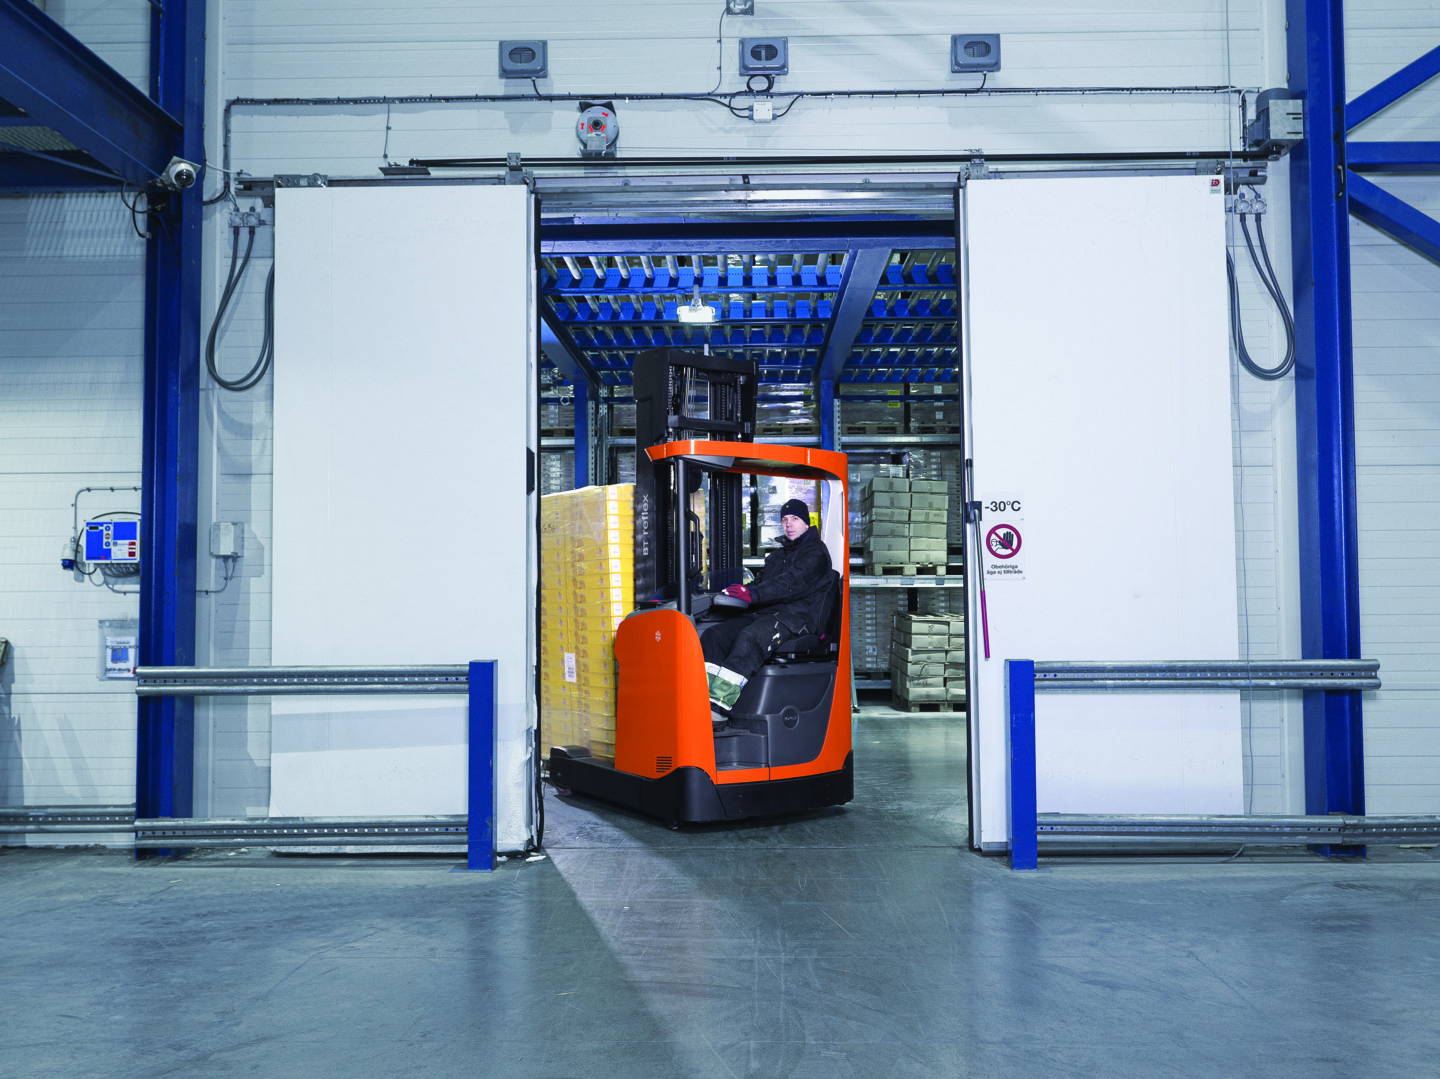 toyota reach truck with operator in cabin